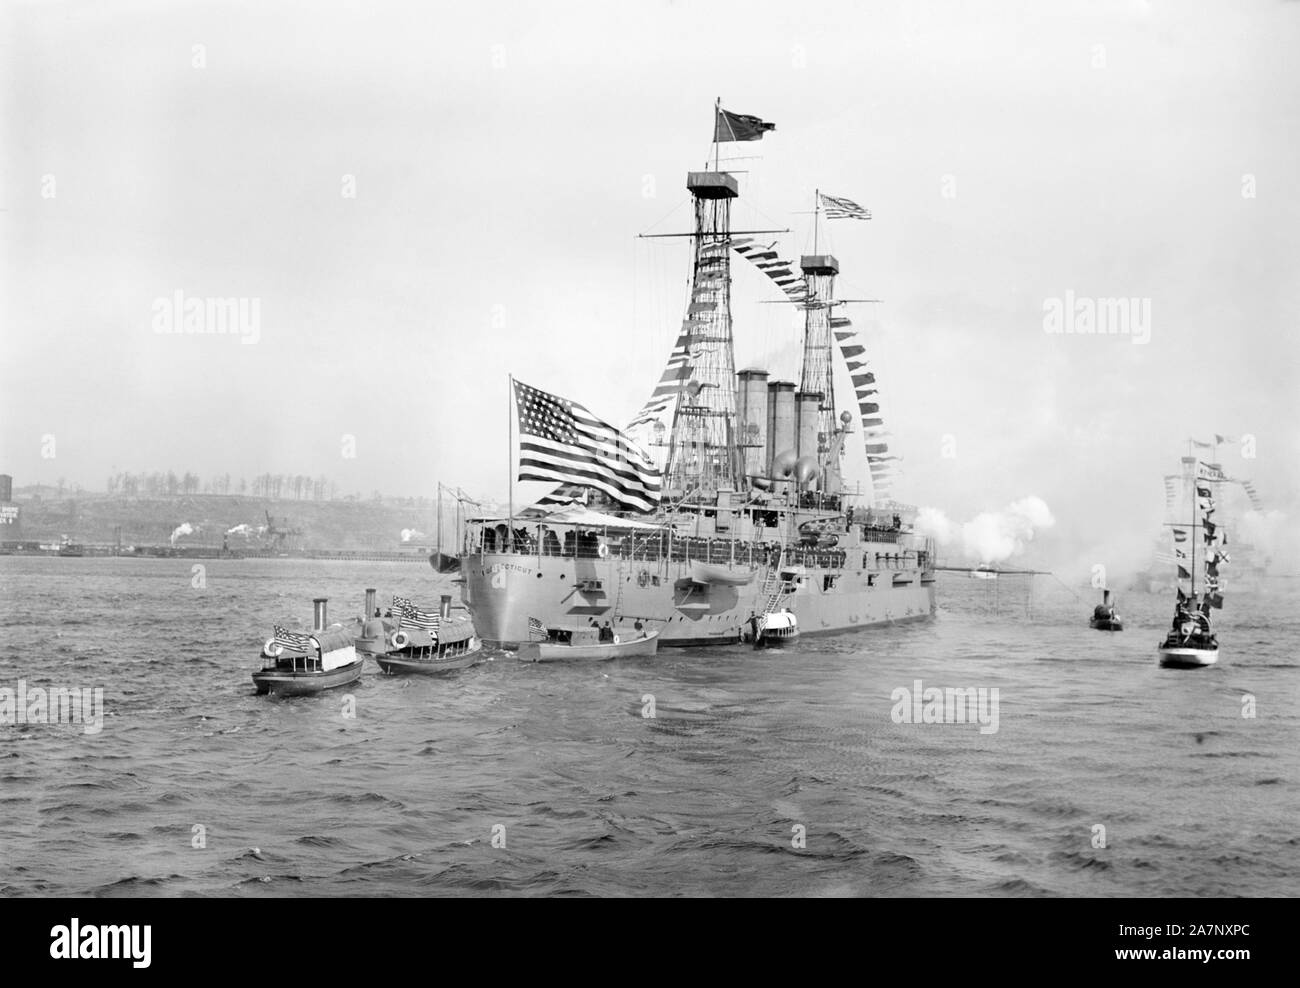 Battleship Connecticut Saluting the Presidential Yacht Mayflower during Naval Review for U.S. President William Howard Taft, New York Harbor, New York City, New York, USA, Photograph by Bain News Service, October 14, 1912 Stock Photo